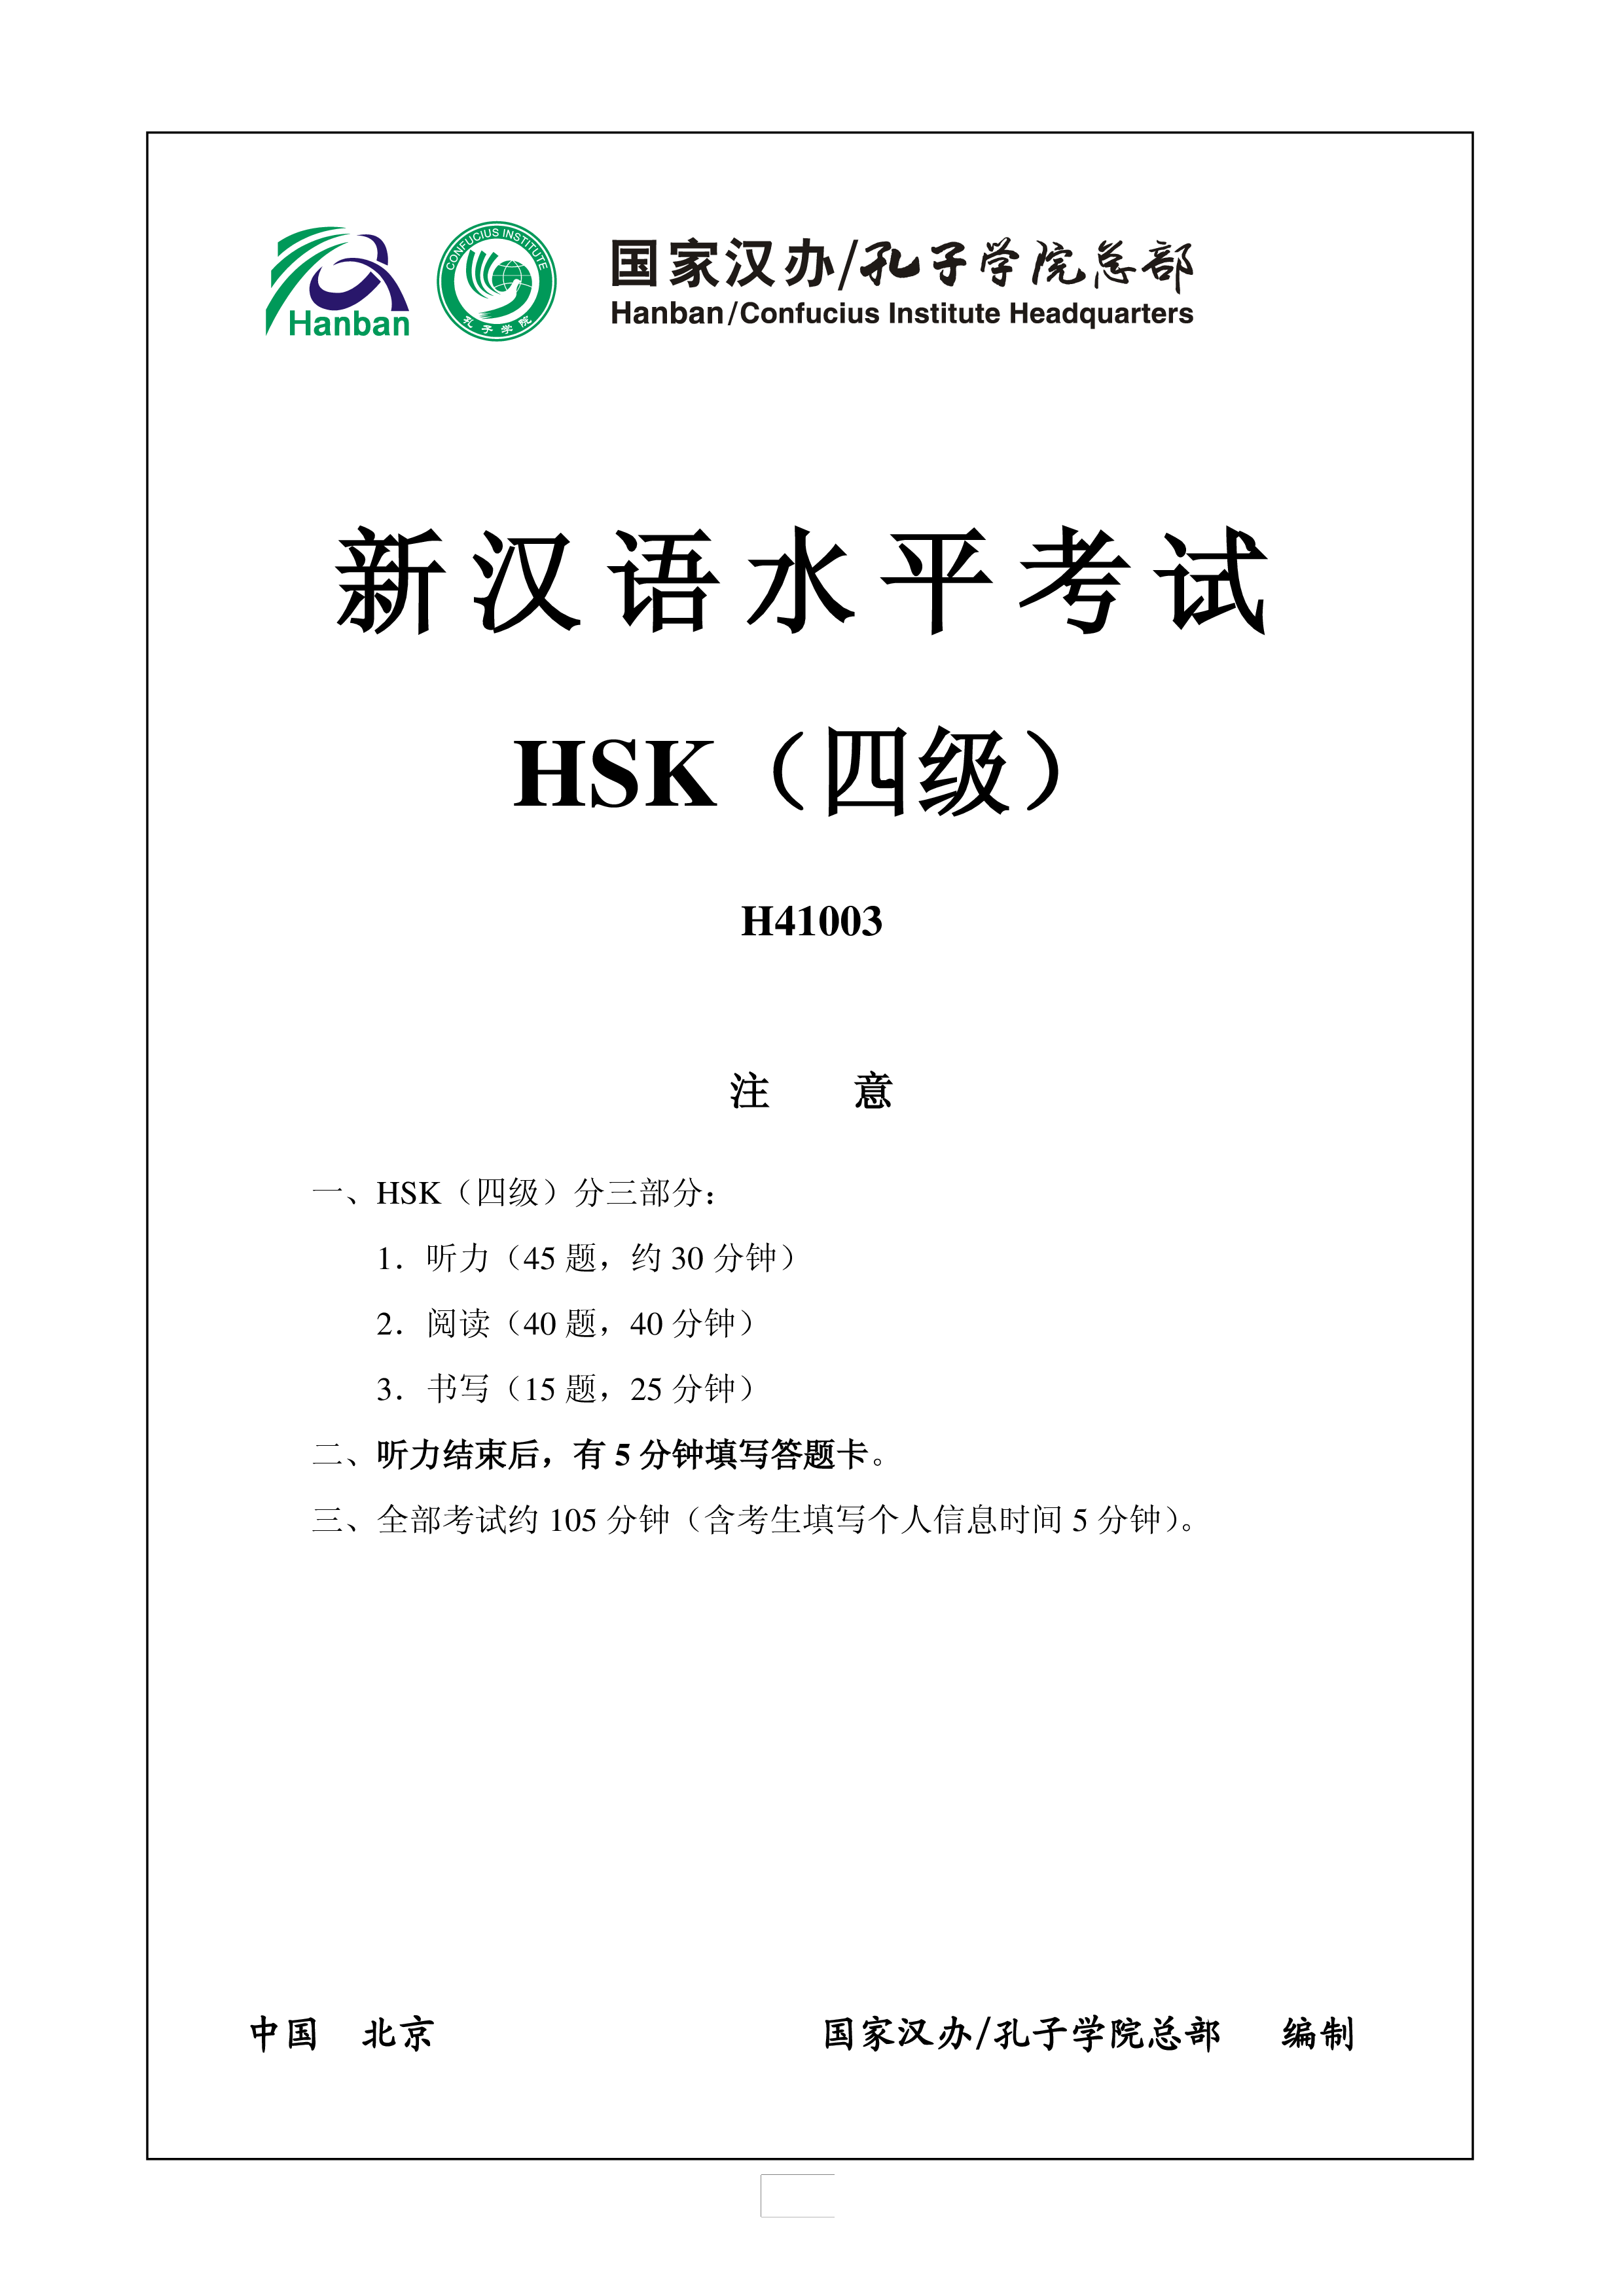 hsk4 chinese exam including answers # hsk h41003 plantilla imagen principal